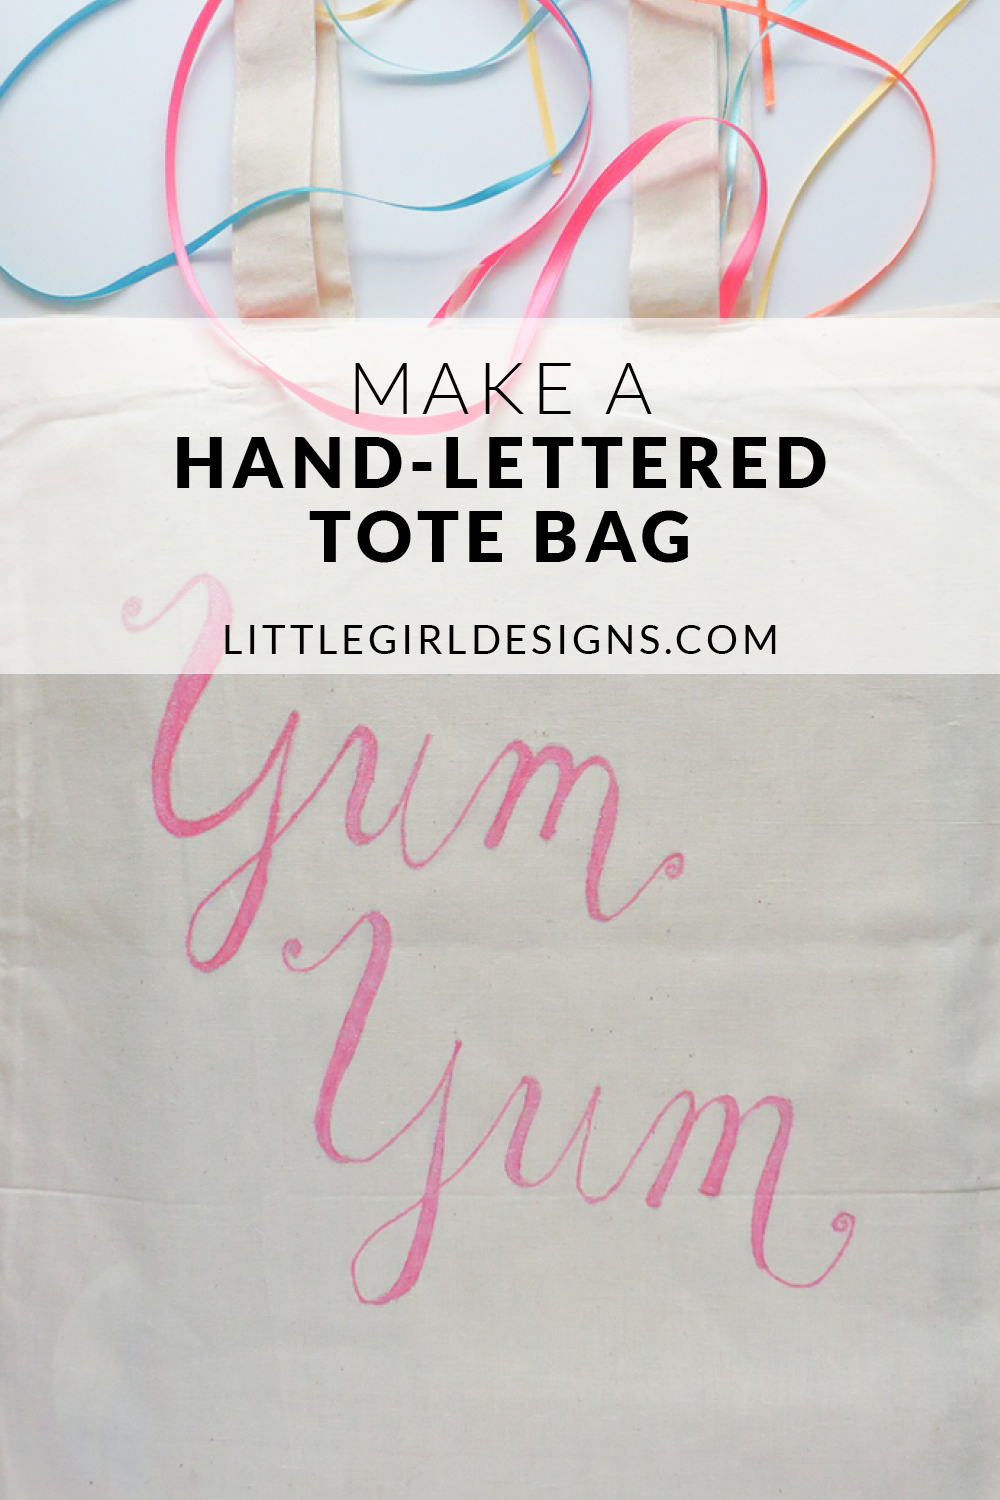 Use this tutorial to whip up a cute hand-lettered tote bag in minutes! You don't even have to know how to do calligraphy to make this! This tutorial is the perfect weekend project and would make a great gift too! :)